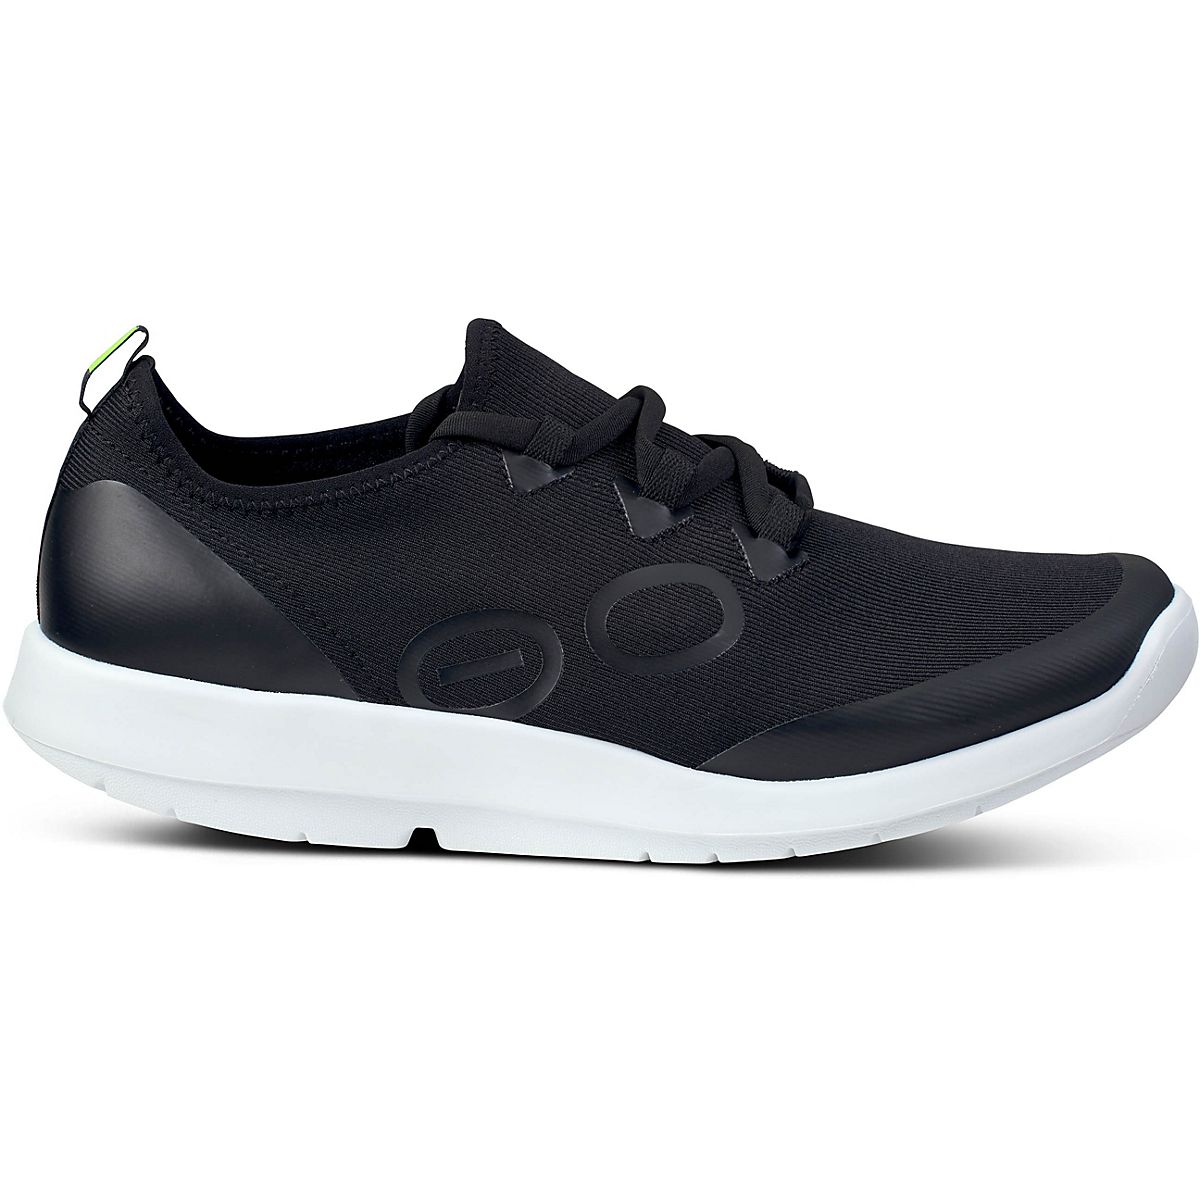 OOFOS Men's OOmg Sport LS Shoes | Free Shipping at Academy